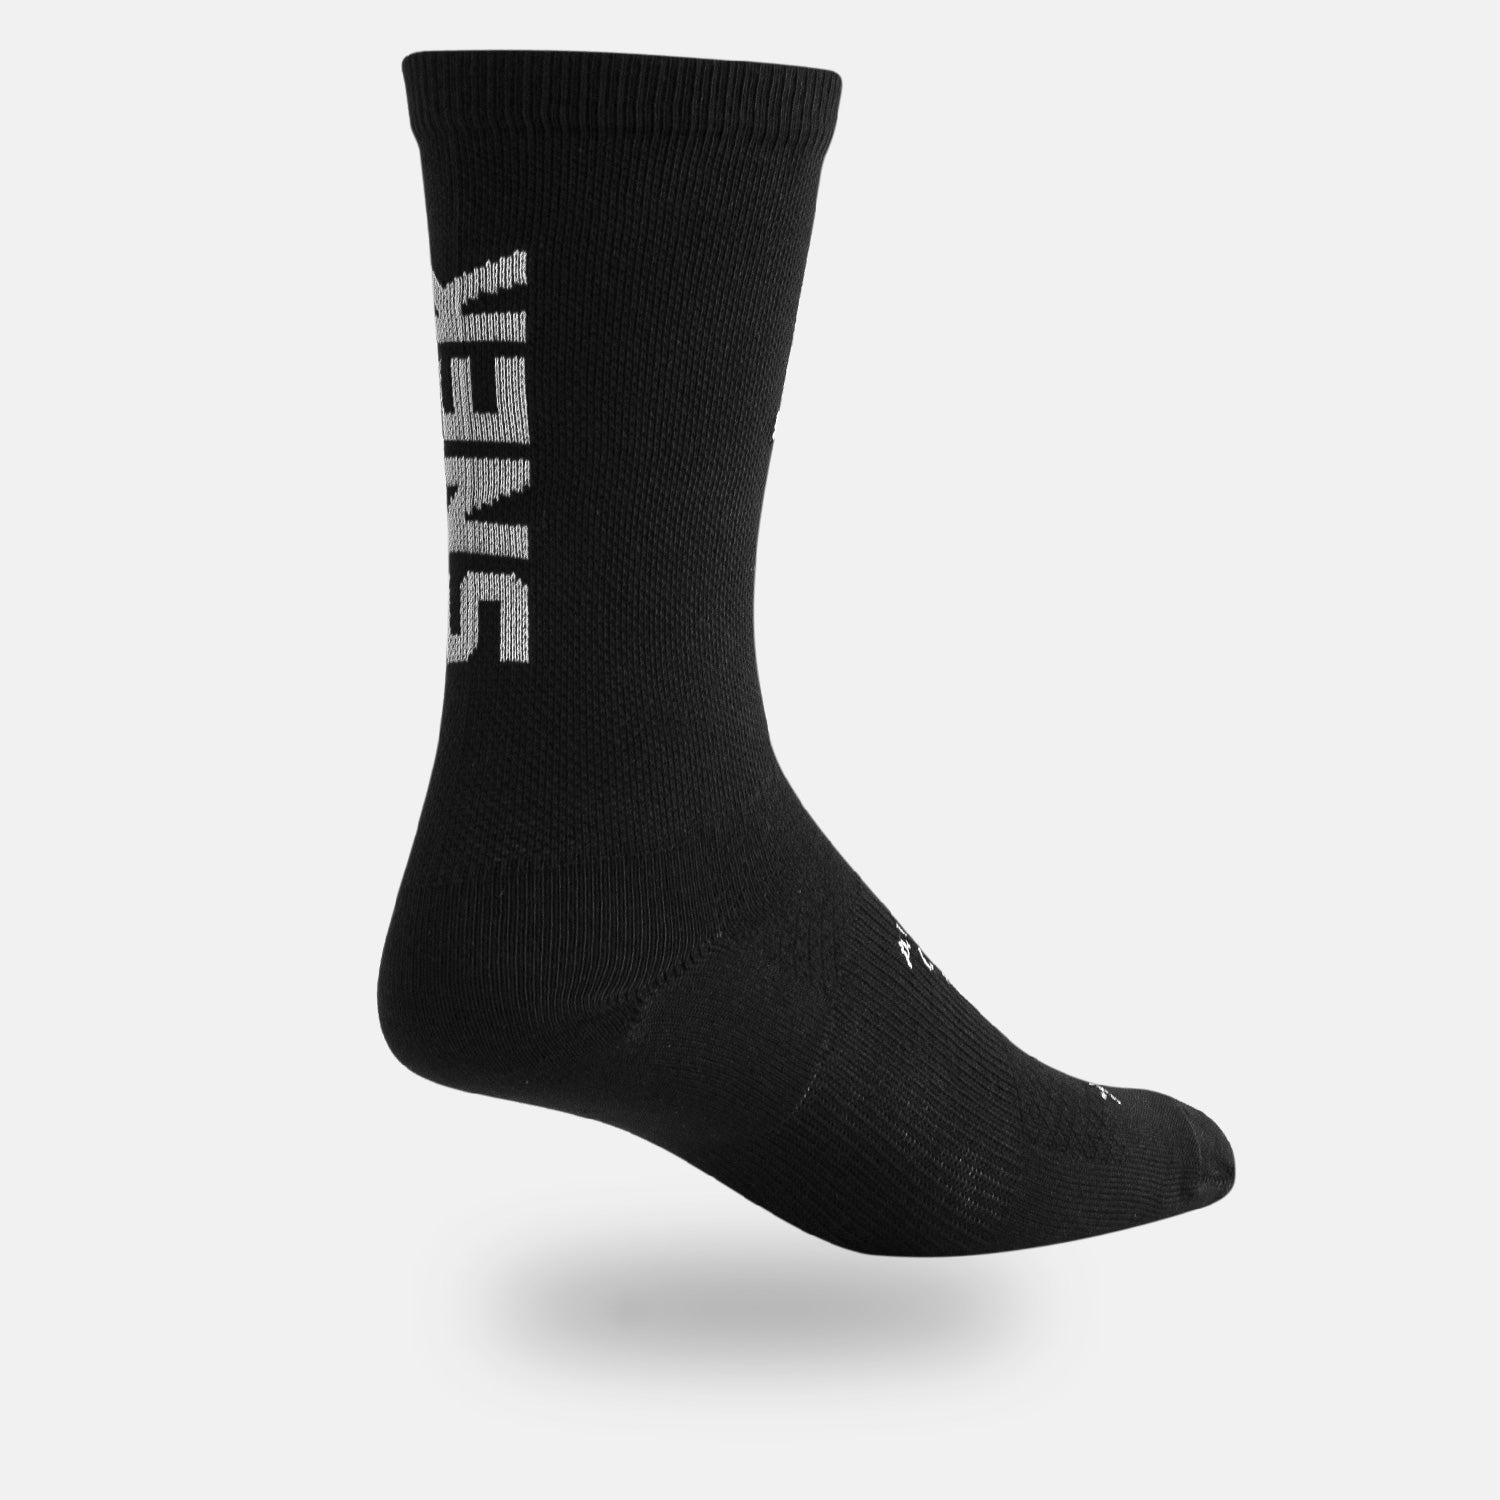 snek cycling lightweight moisture wicking cycling and outdoor sock